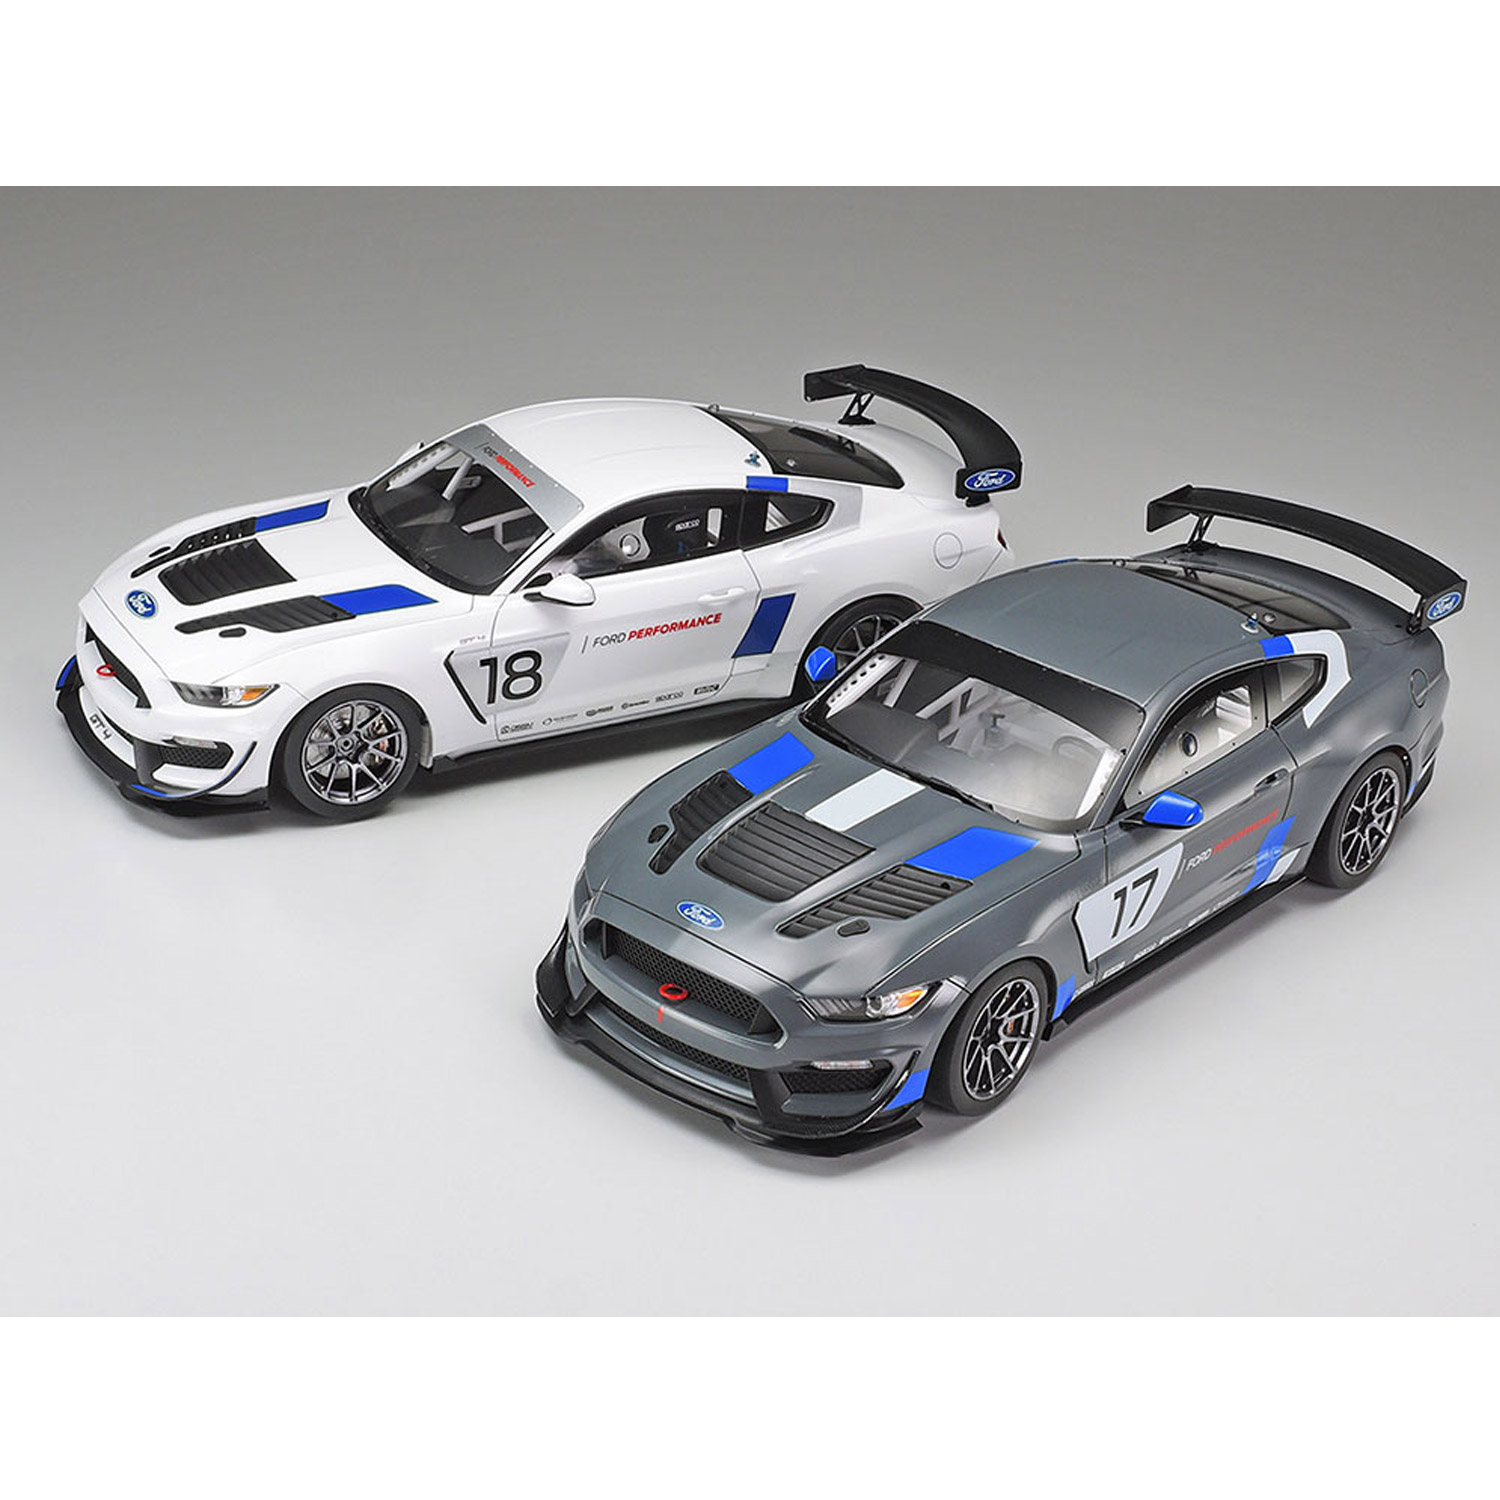 Maquette voiture : Ford Mustang GT4 - Maquettes Tamiya - Rue des